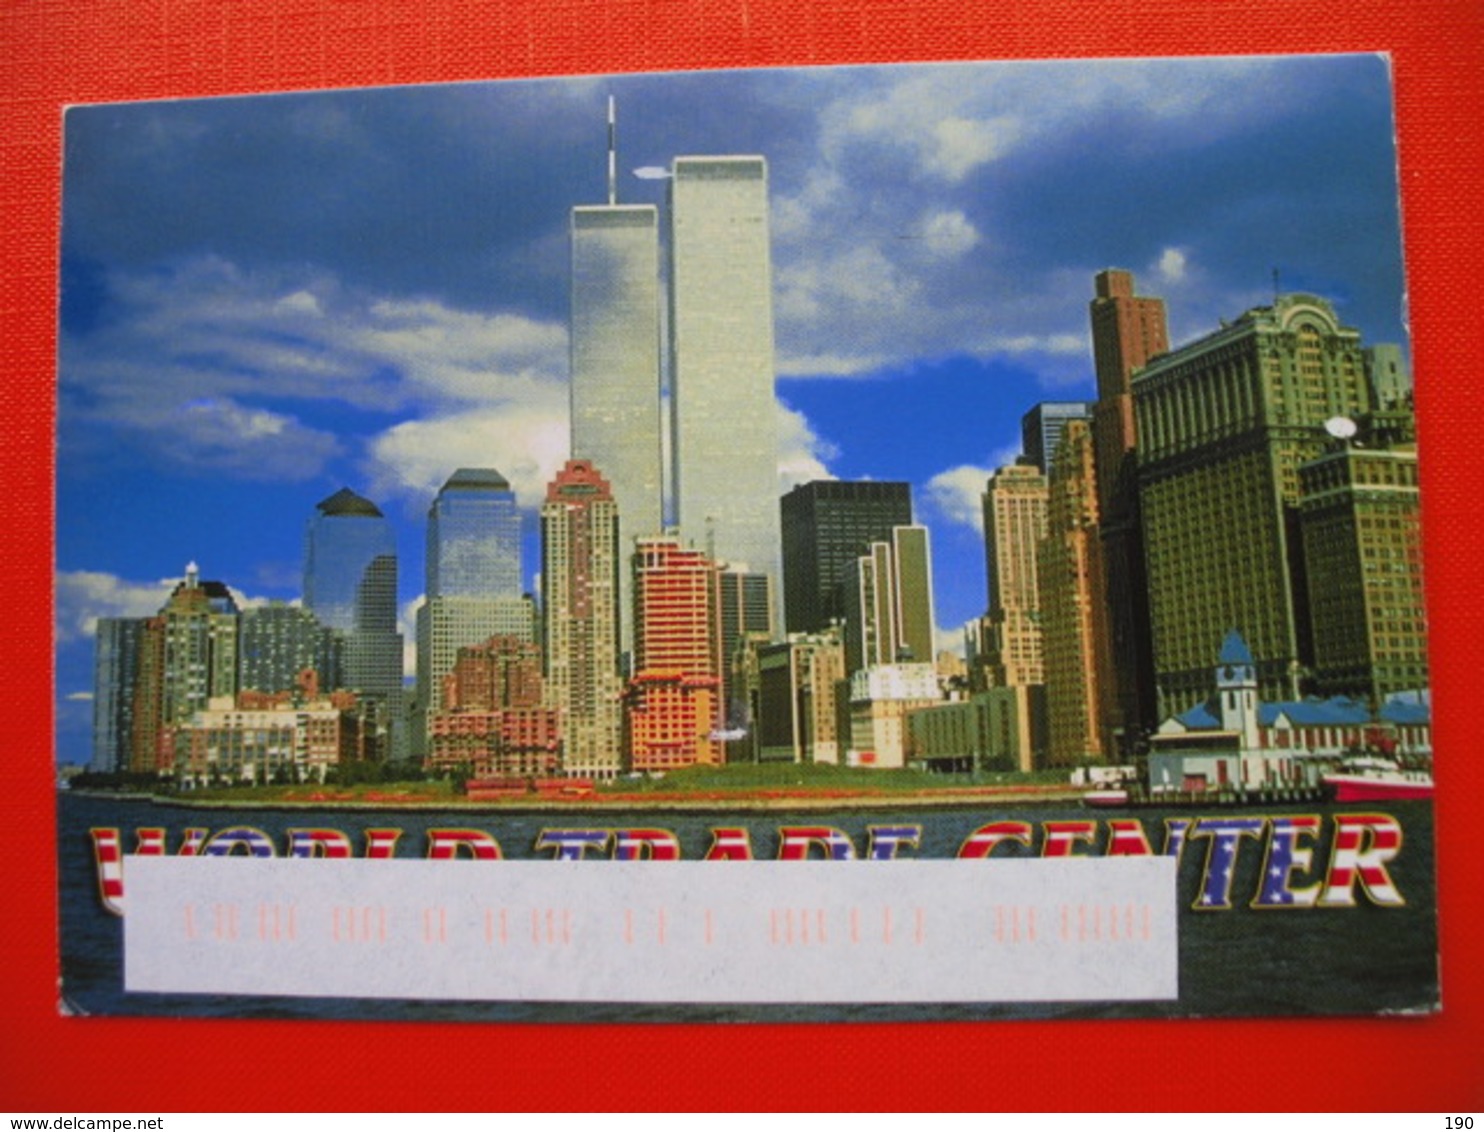 Twin Towers - World Trade Center